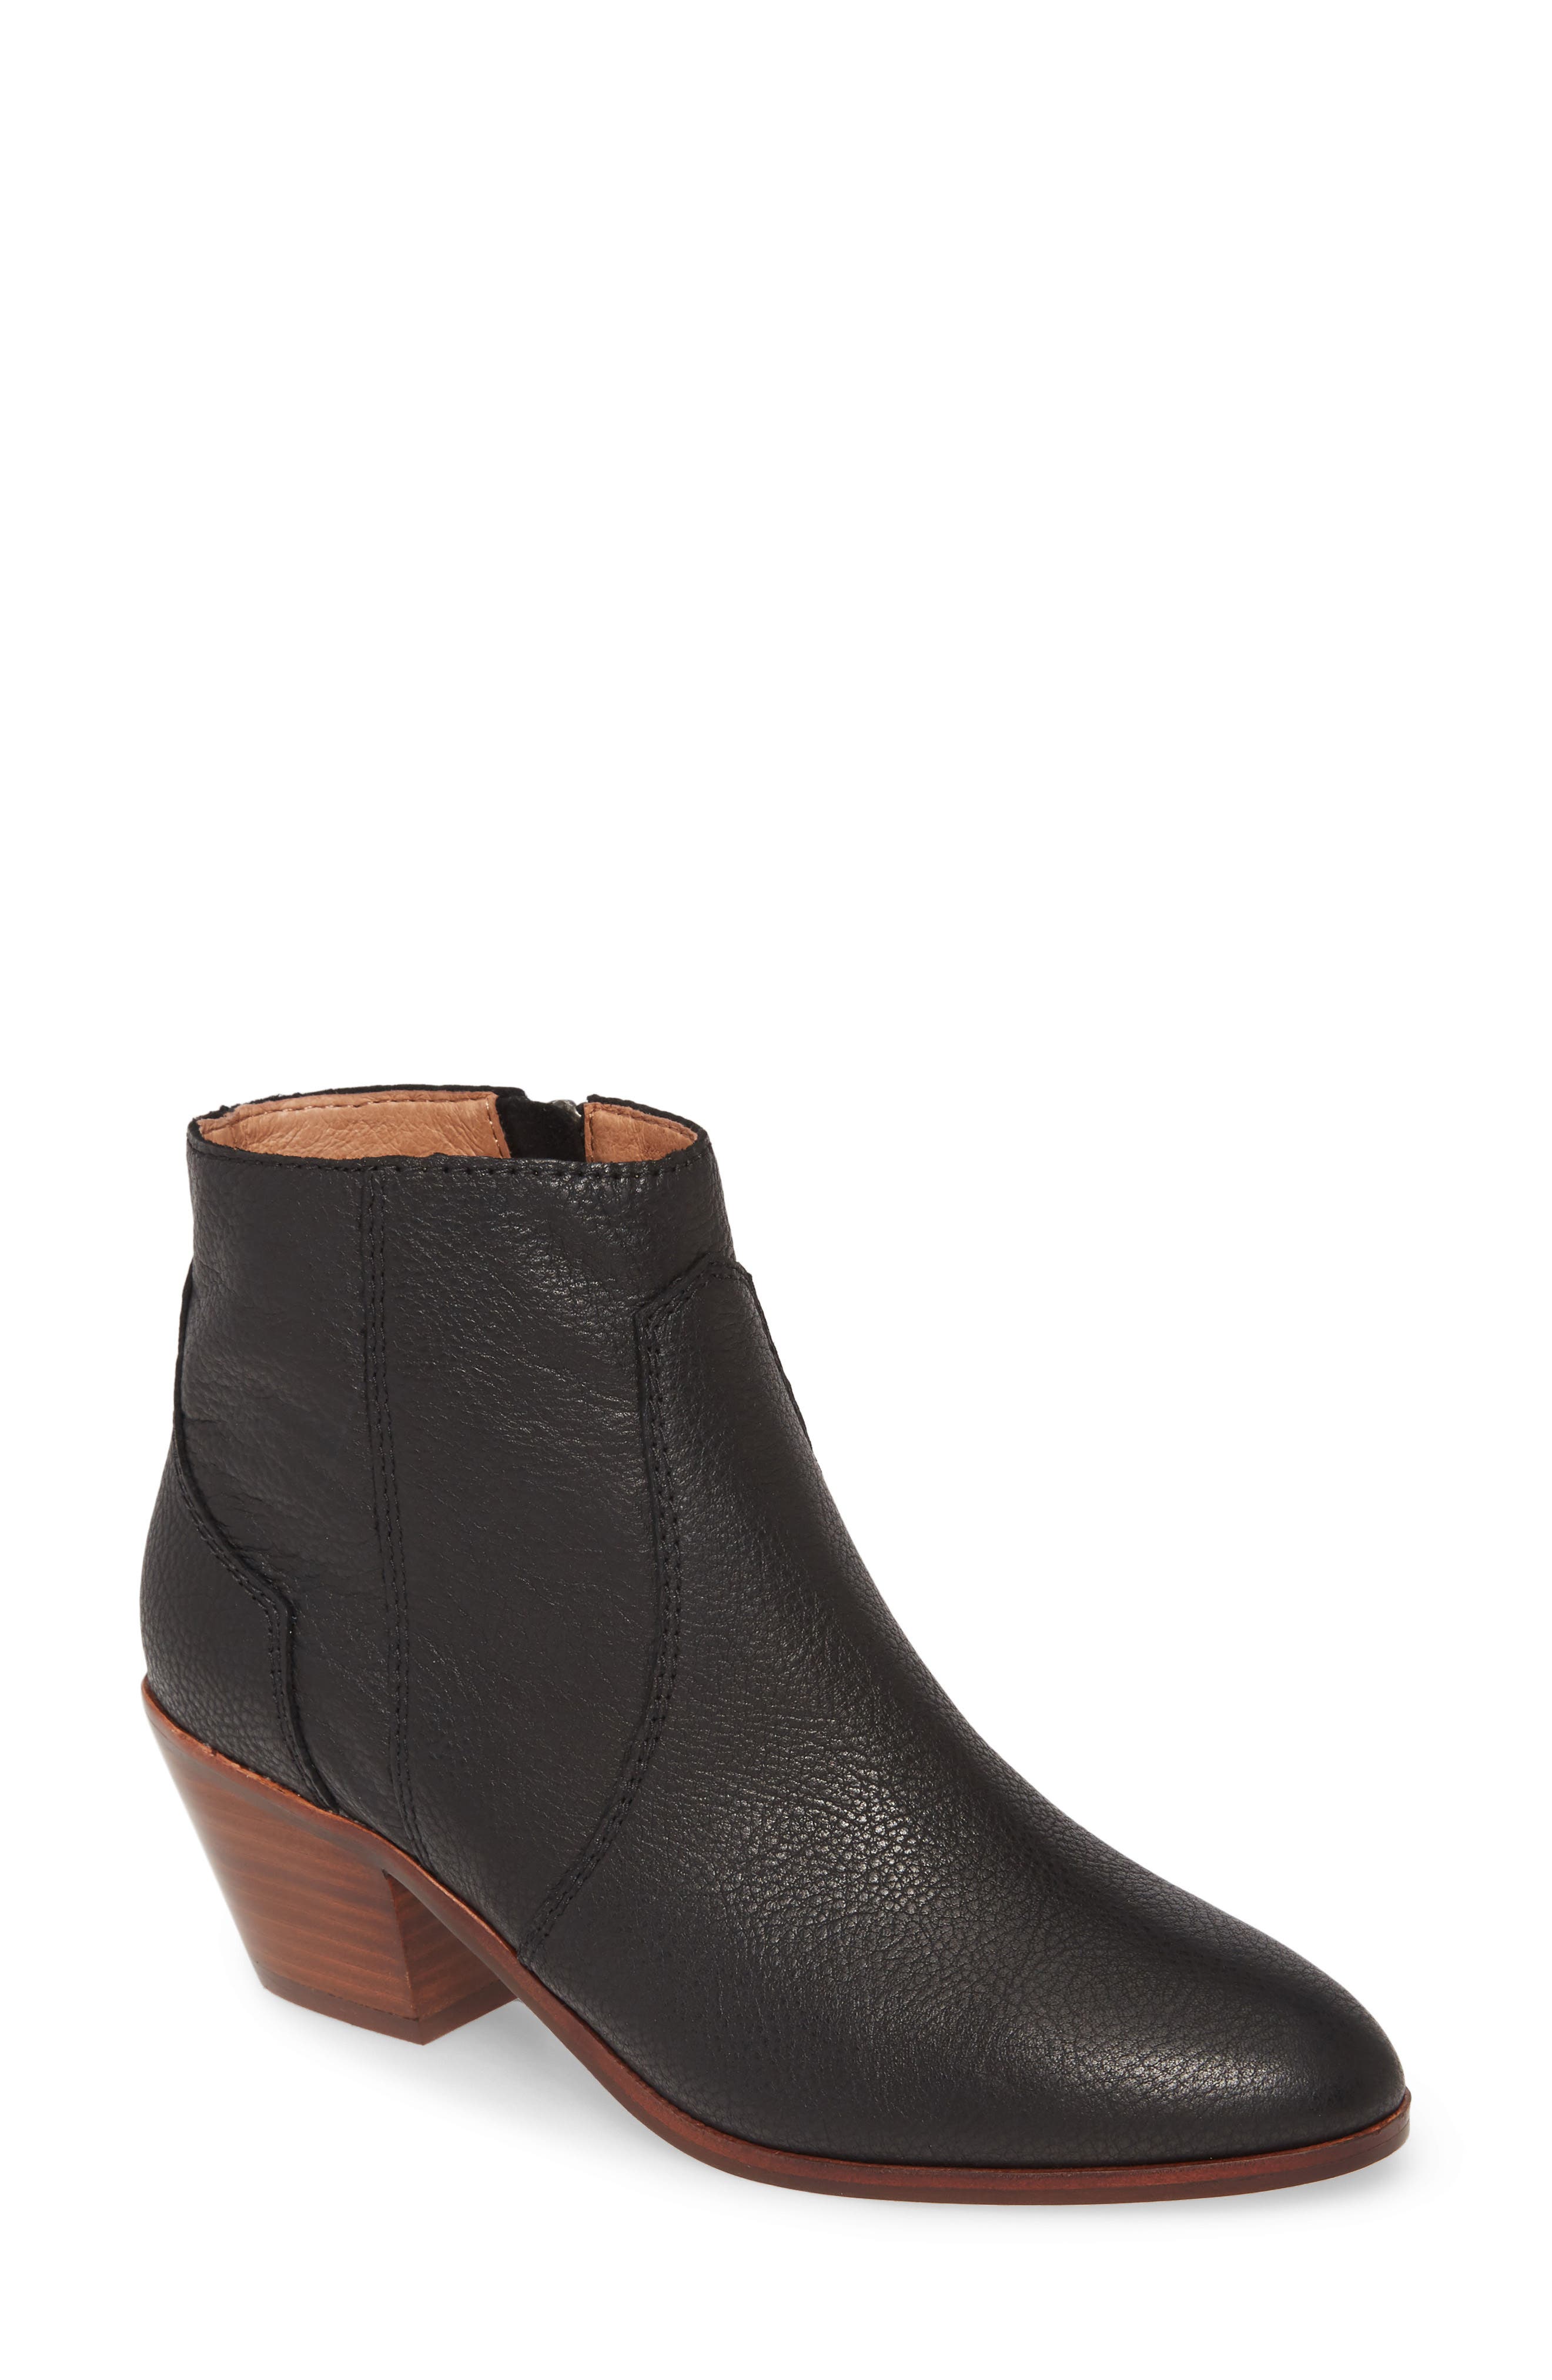 Madewell | The Western Leather Boot 